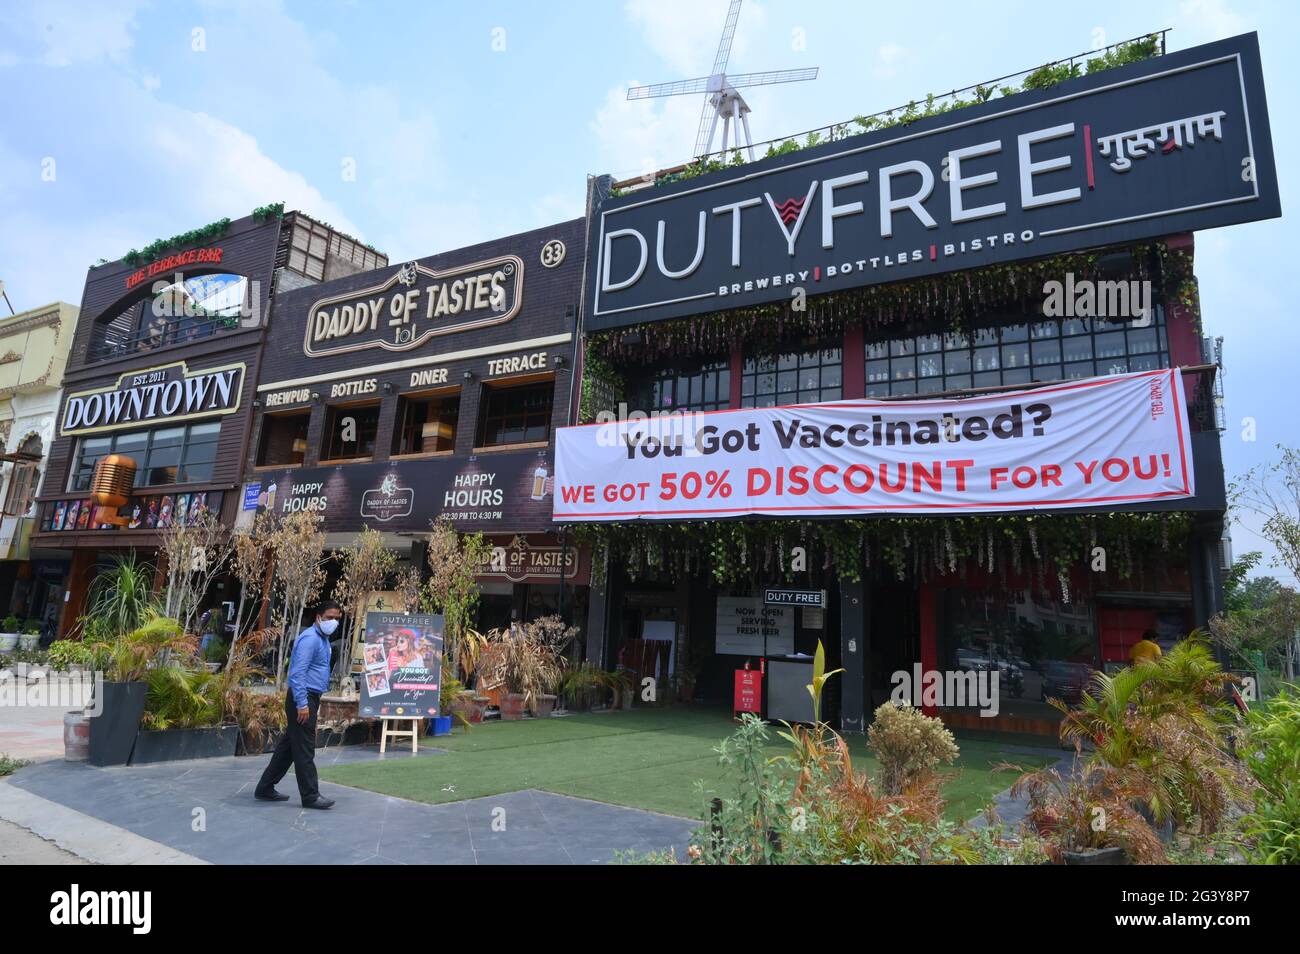 To make people aware about vaccination, hotel and restaurant operators in Gurugram, giving discount. gurgaon.india. Stock Photo